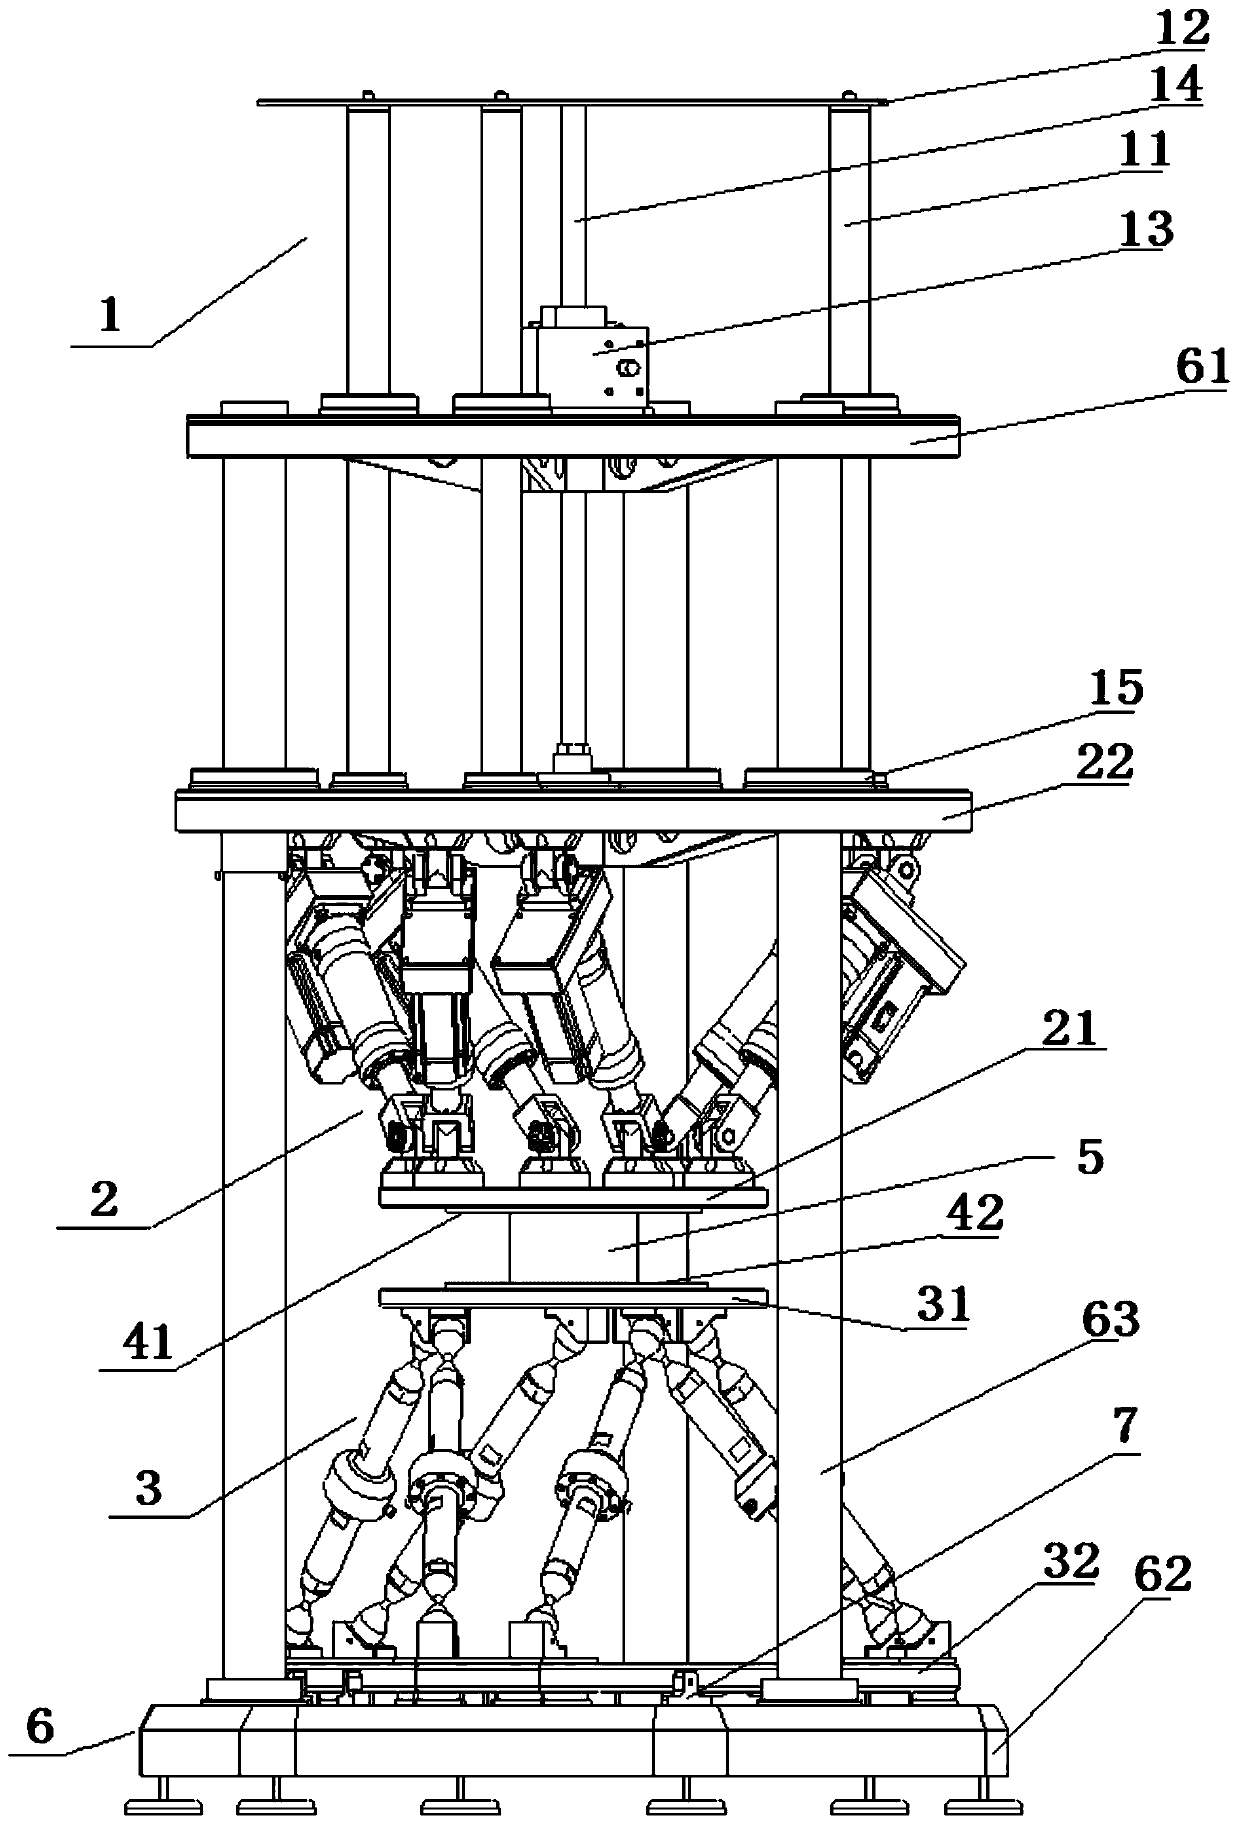 A calibration device for a six-degree-of-freedom force and torque sensor